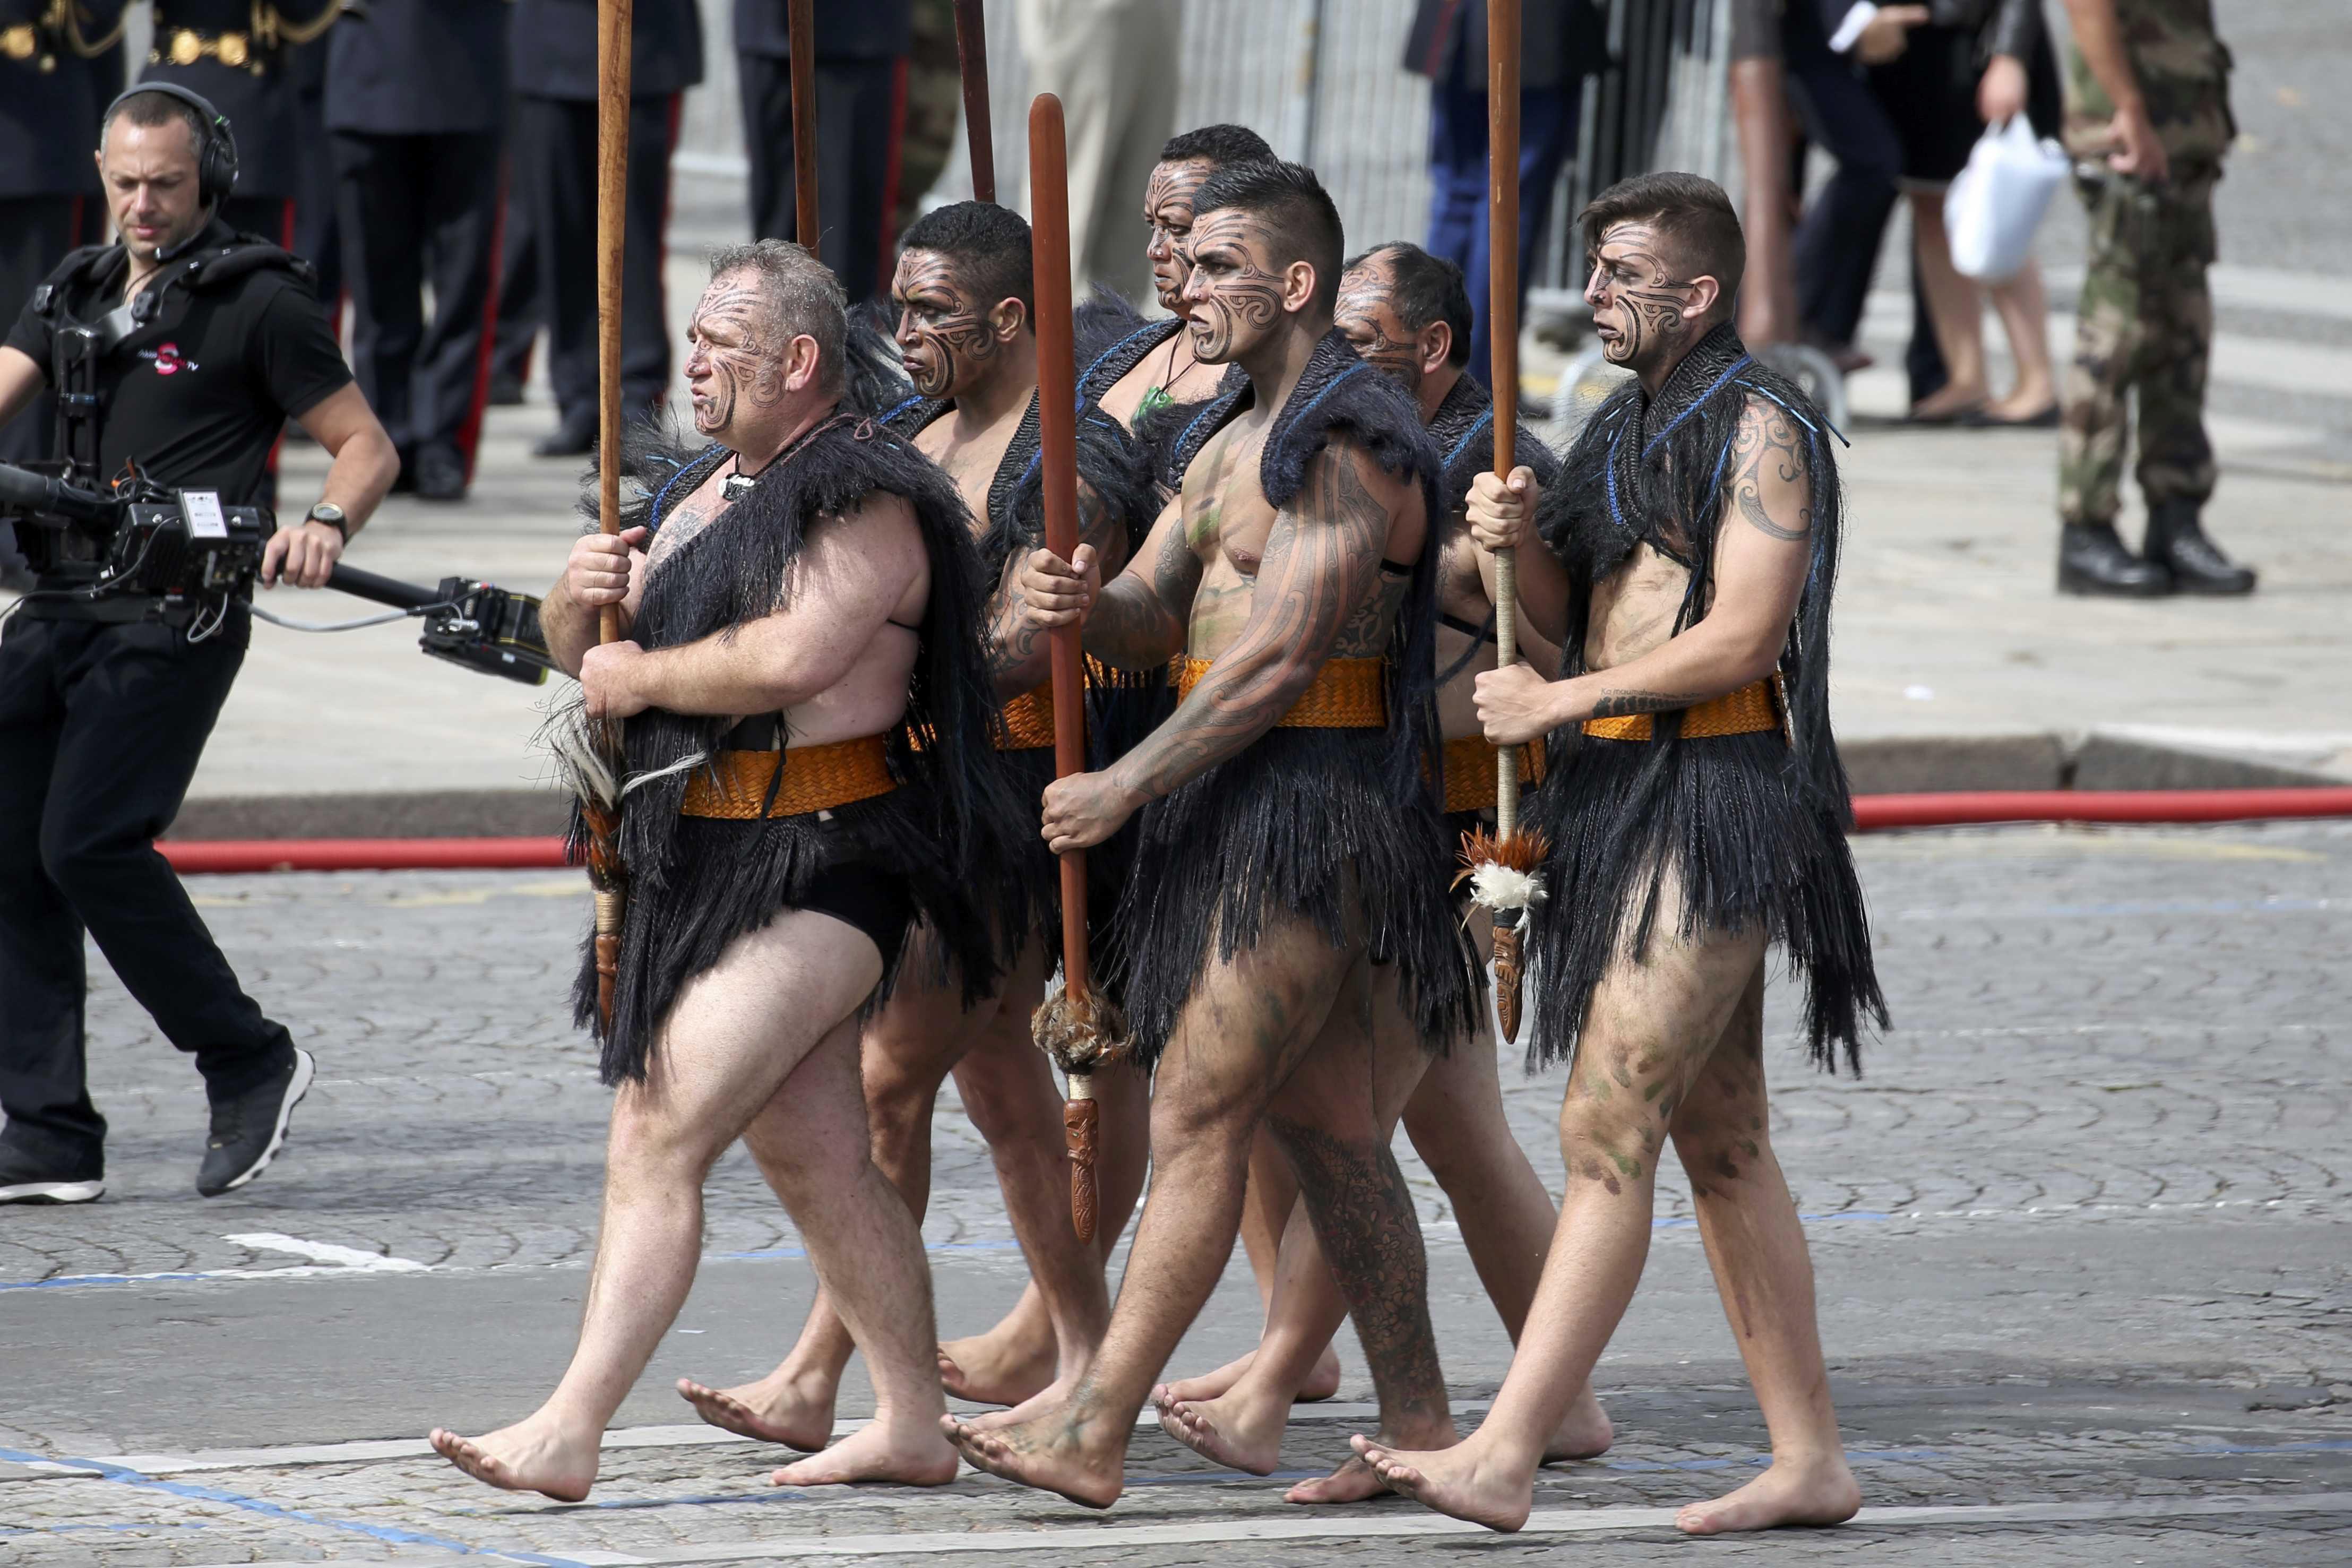 Maori warriors from New Zealand march during the traditional Bastille Day military parade on the Pla